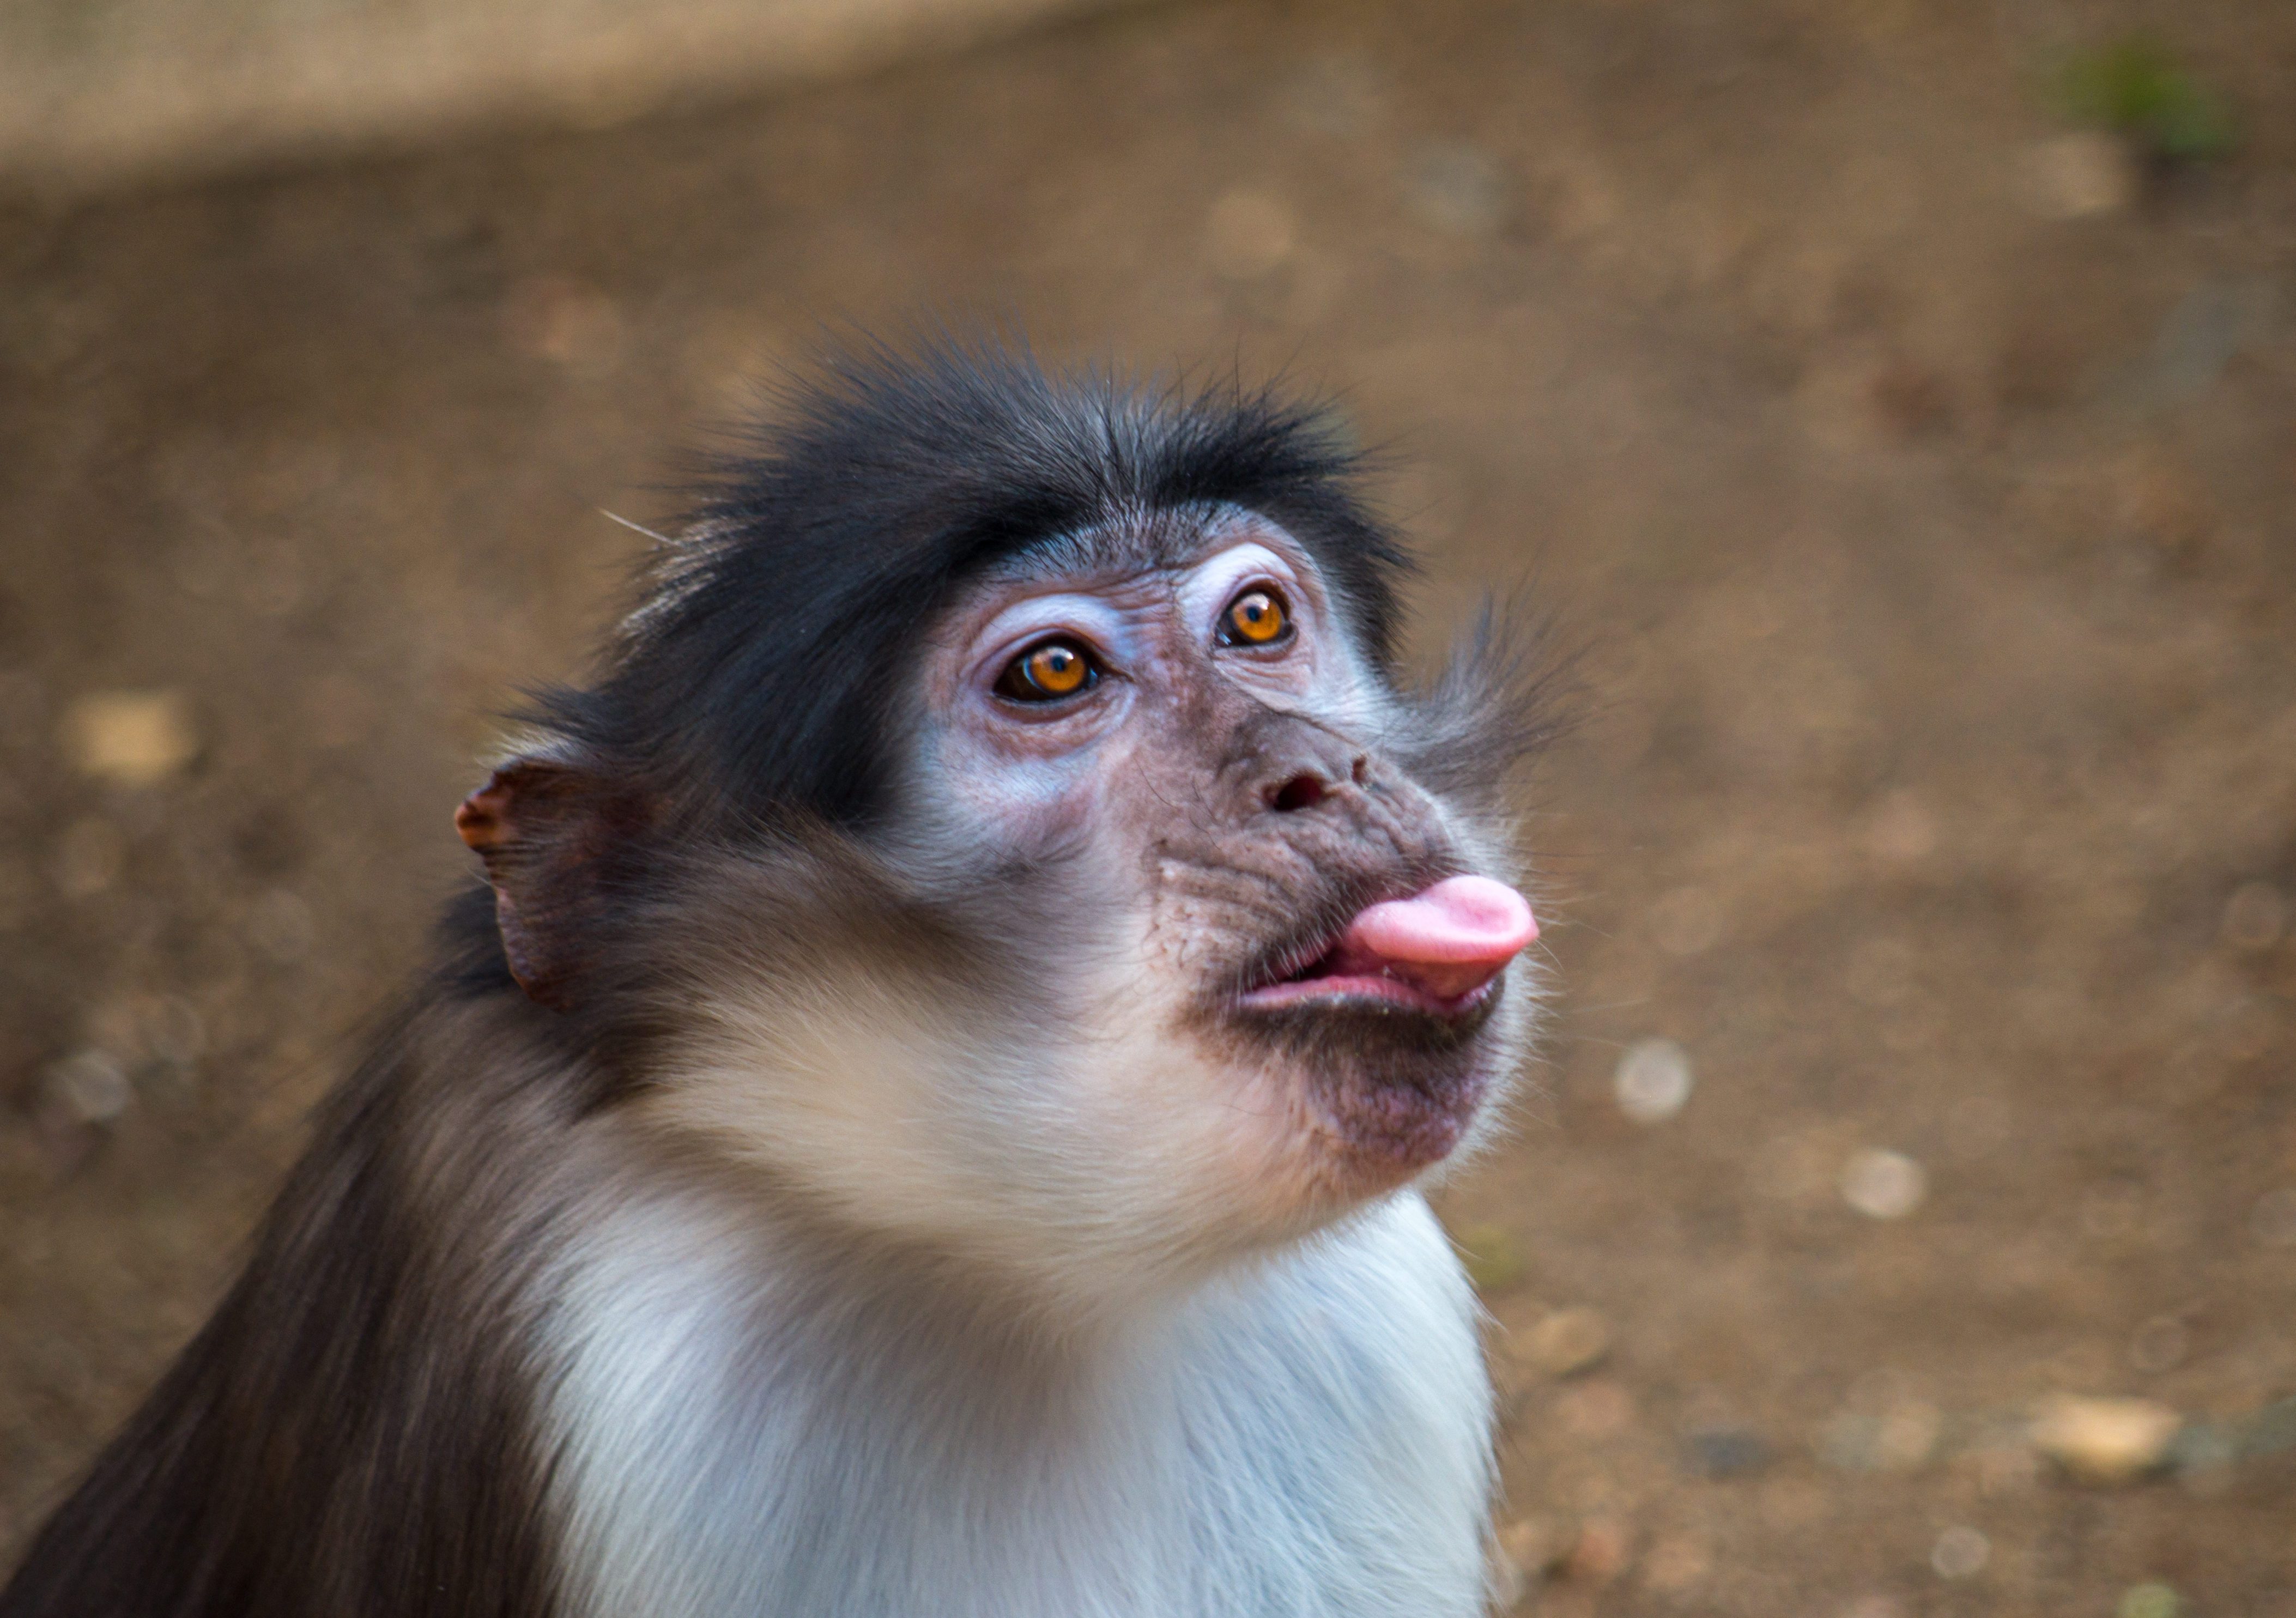 How Many Types of Monkeys Are There in the World? Reader's Digest